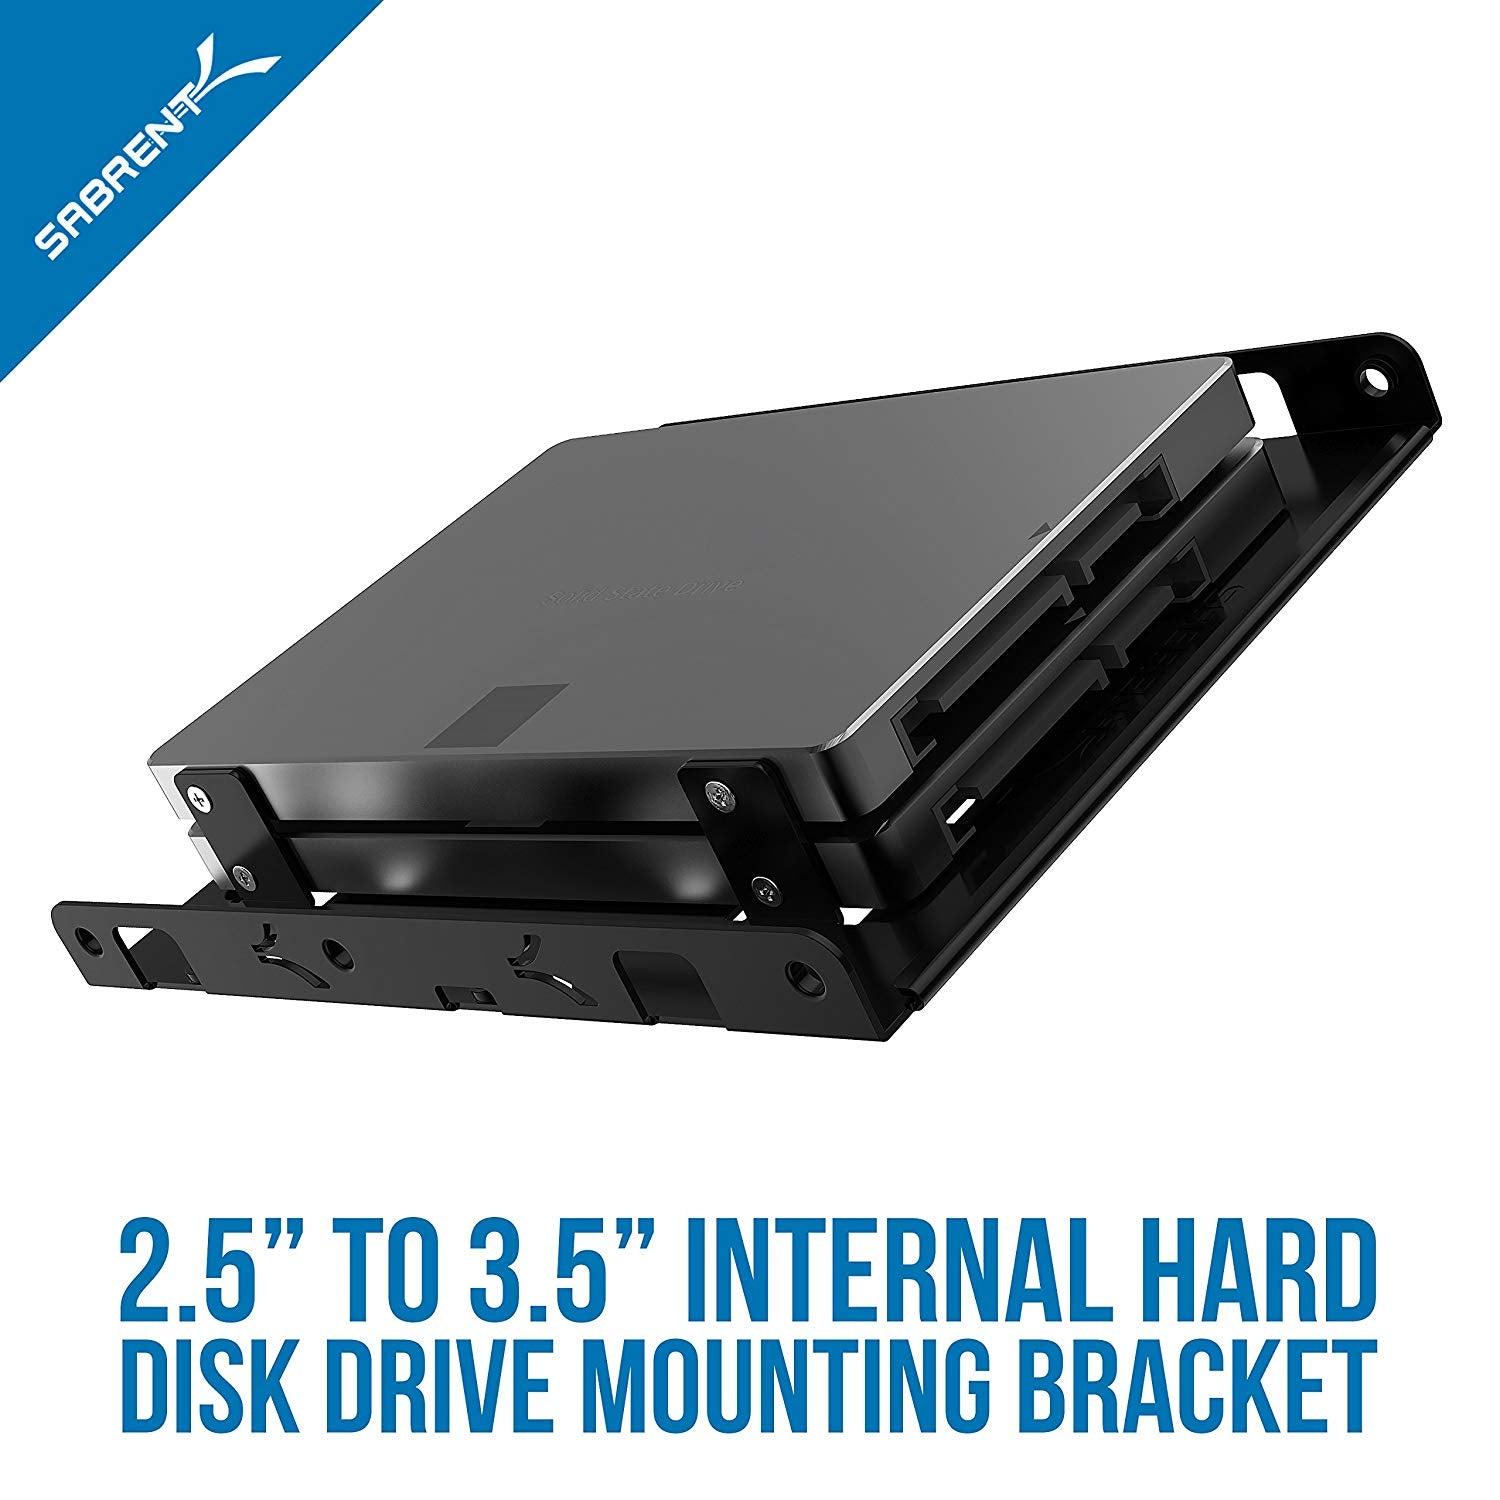 At interagere skuffe afbrudt 3.5-Inch to x2 SSD / 2.5-Inch Internal Hard Drive Mounting Kit - Sabrent